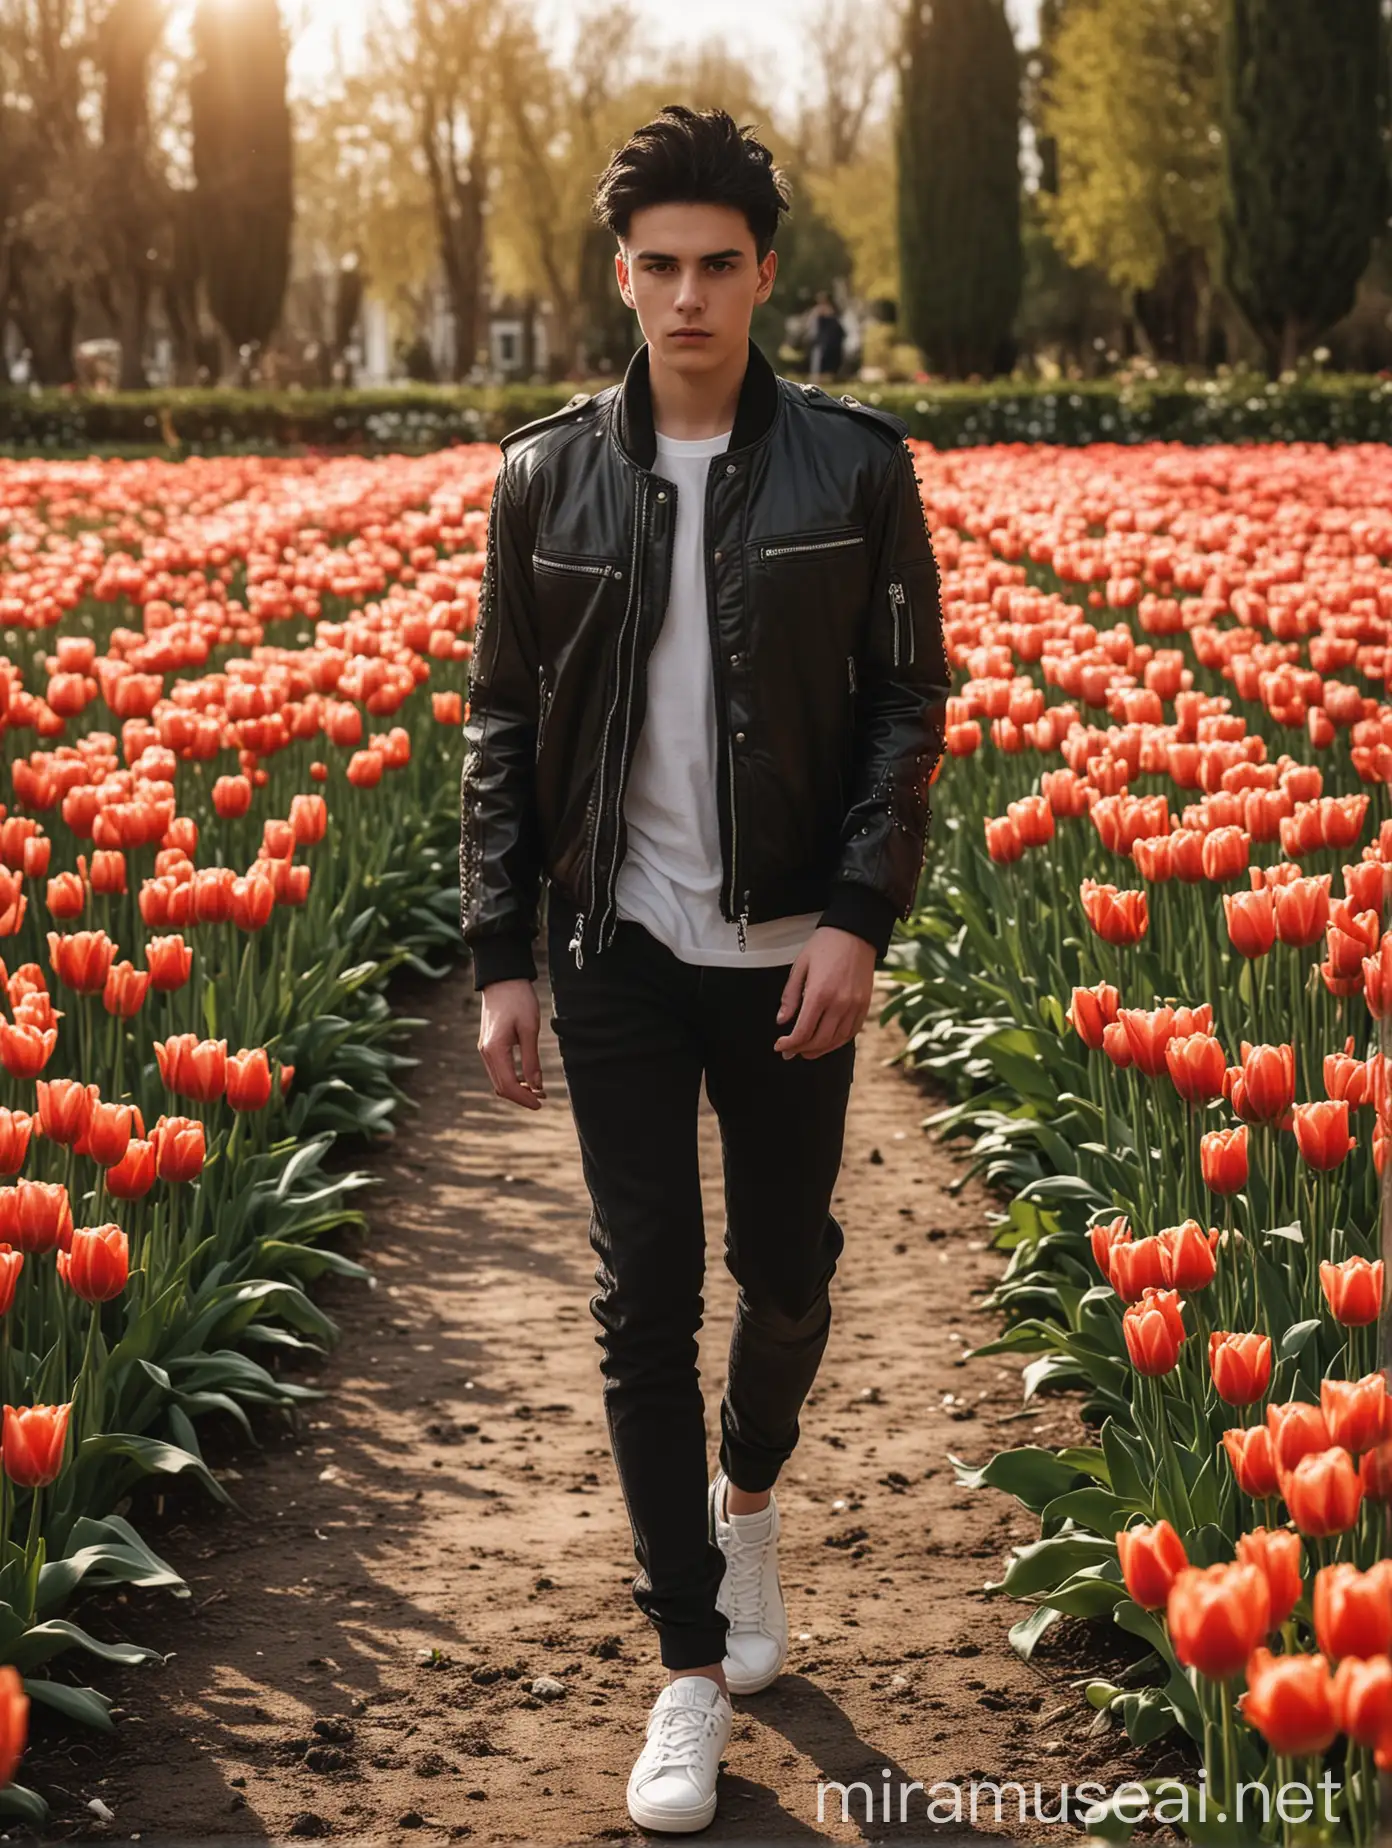 full body, long shoot, cinematic portrait of a 18 year old, handsome man with spiky black hair by side walking on Tulip Garden, Wearing Jacket and white shoes. with evening sunlight shining from behind,  profesaional photography.  flat face looking at the camera. 